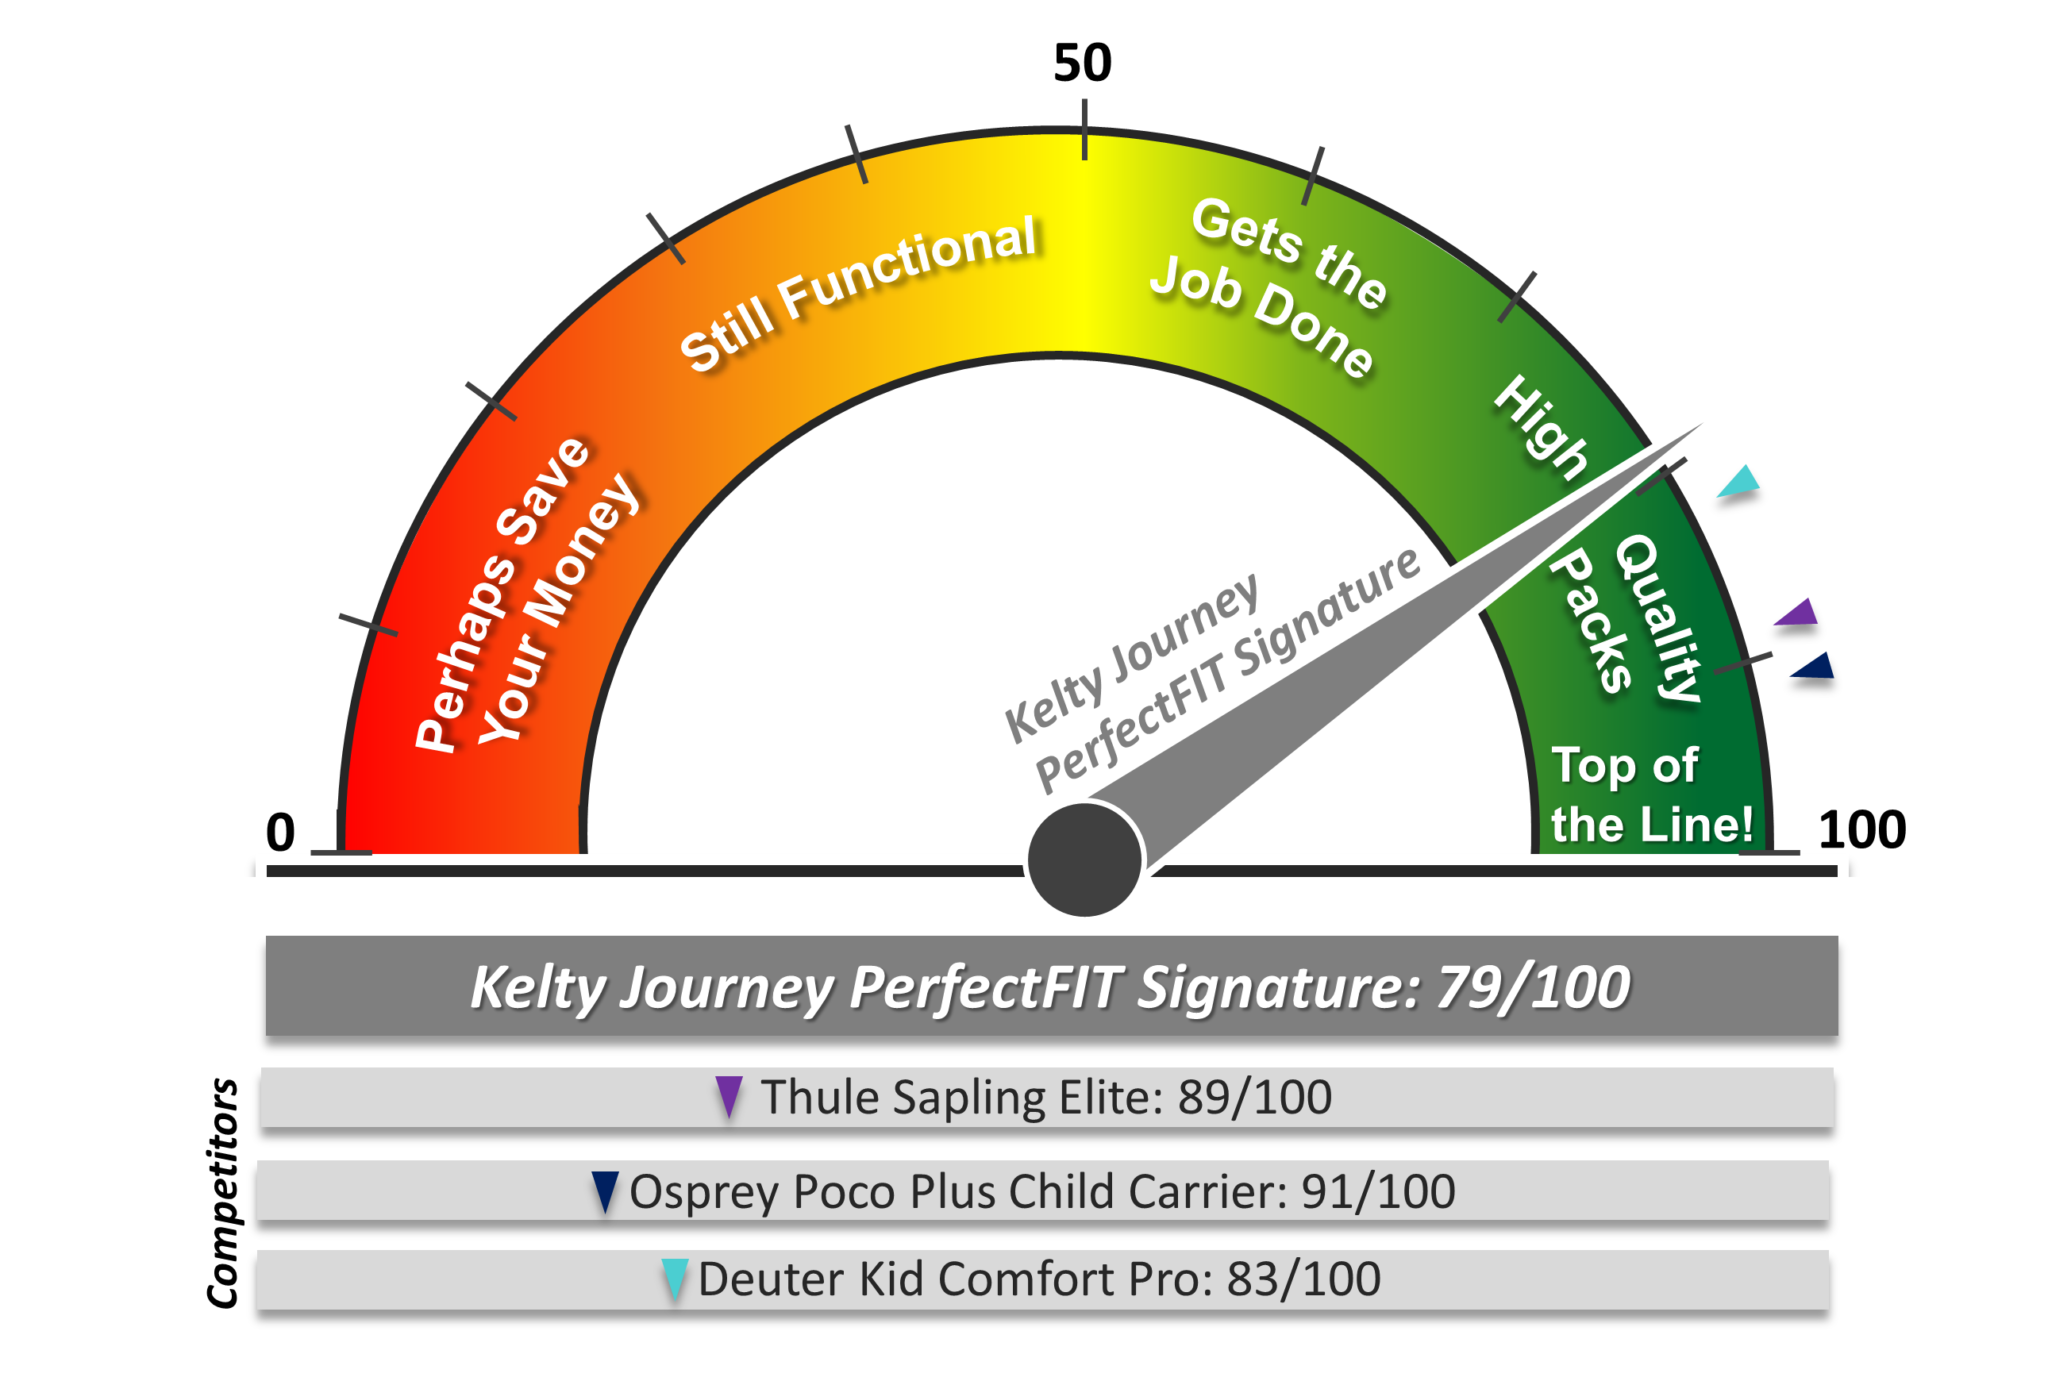 dial chart showing Kelty Journey PerfectFIT Signature rating